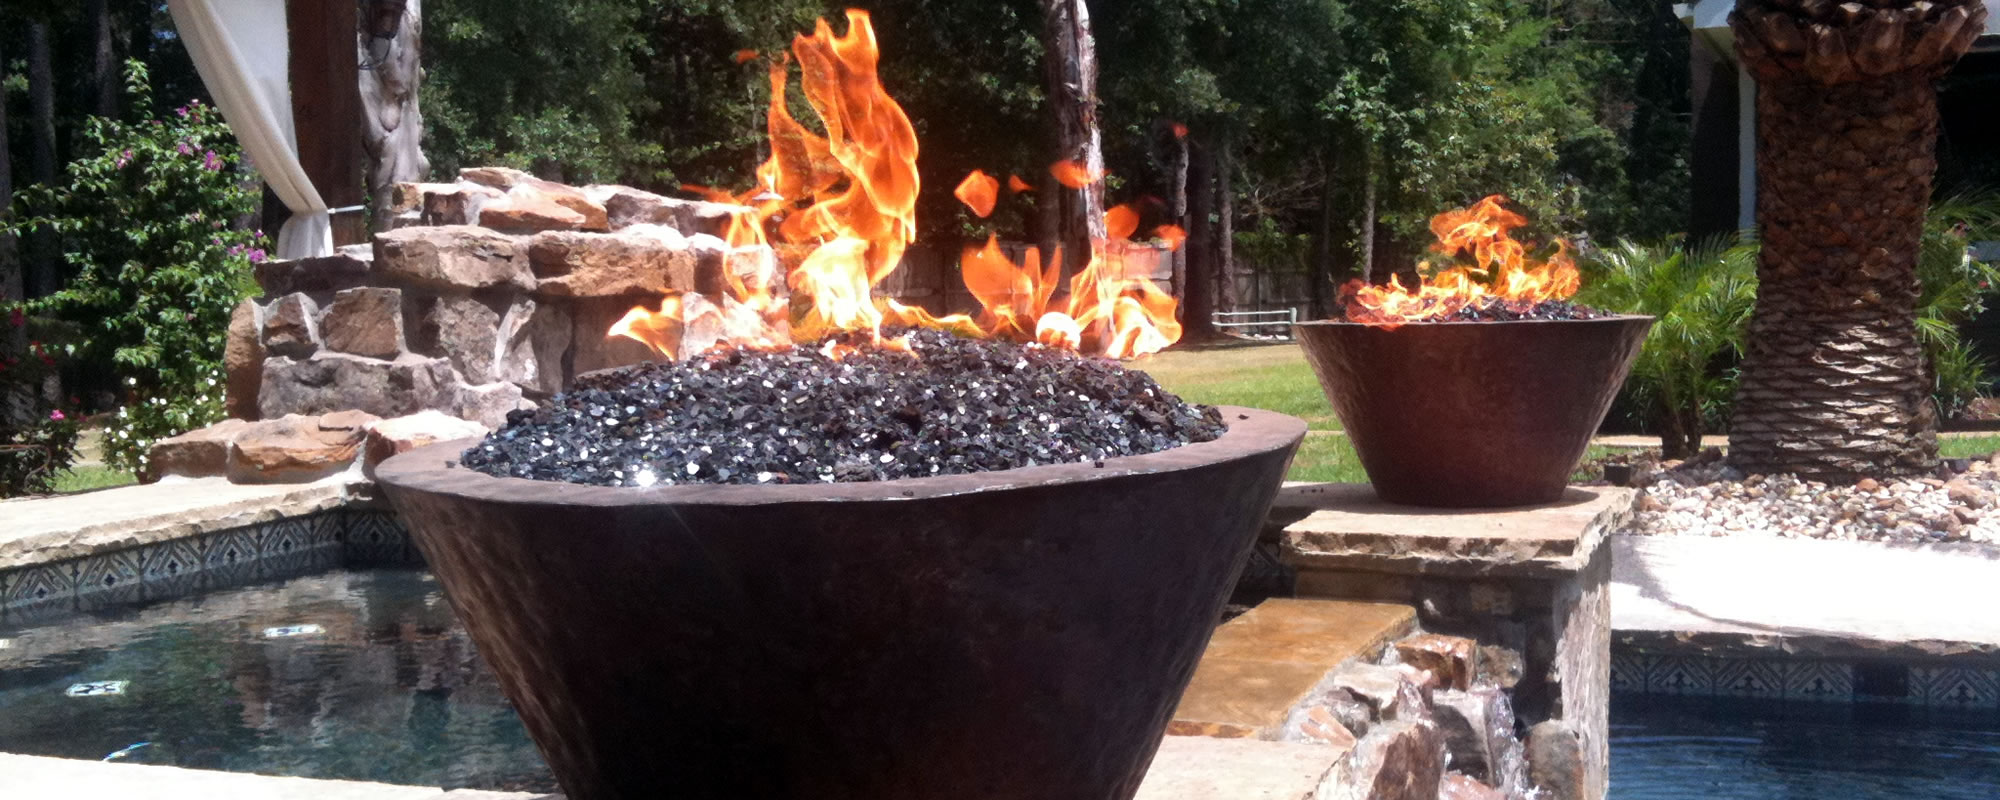 Fire on Water Features for Outdoor Living Spaces